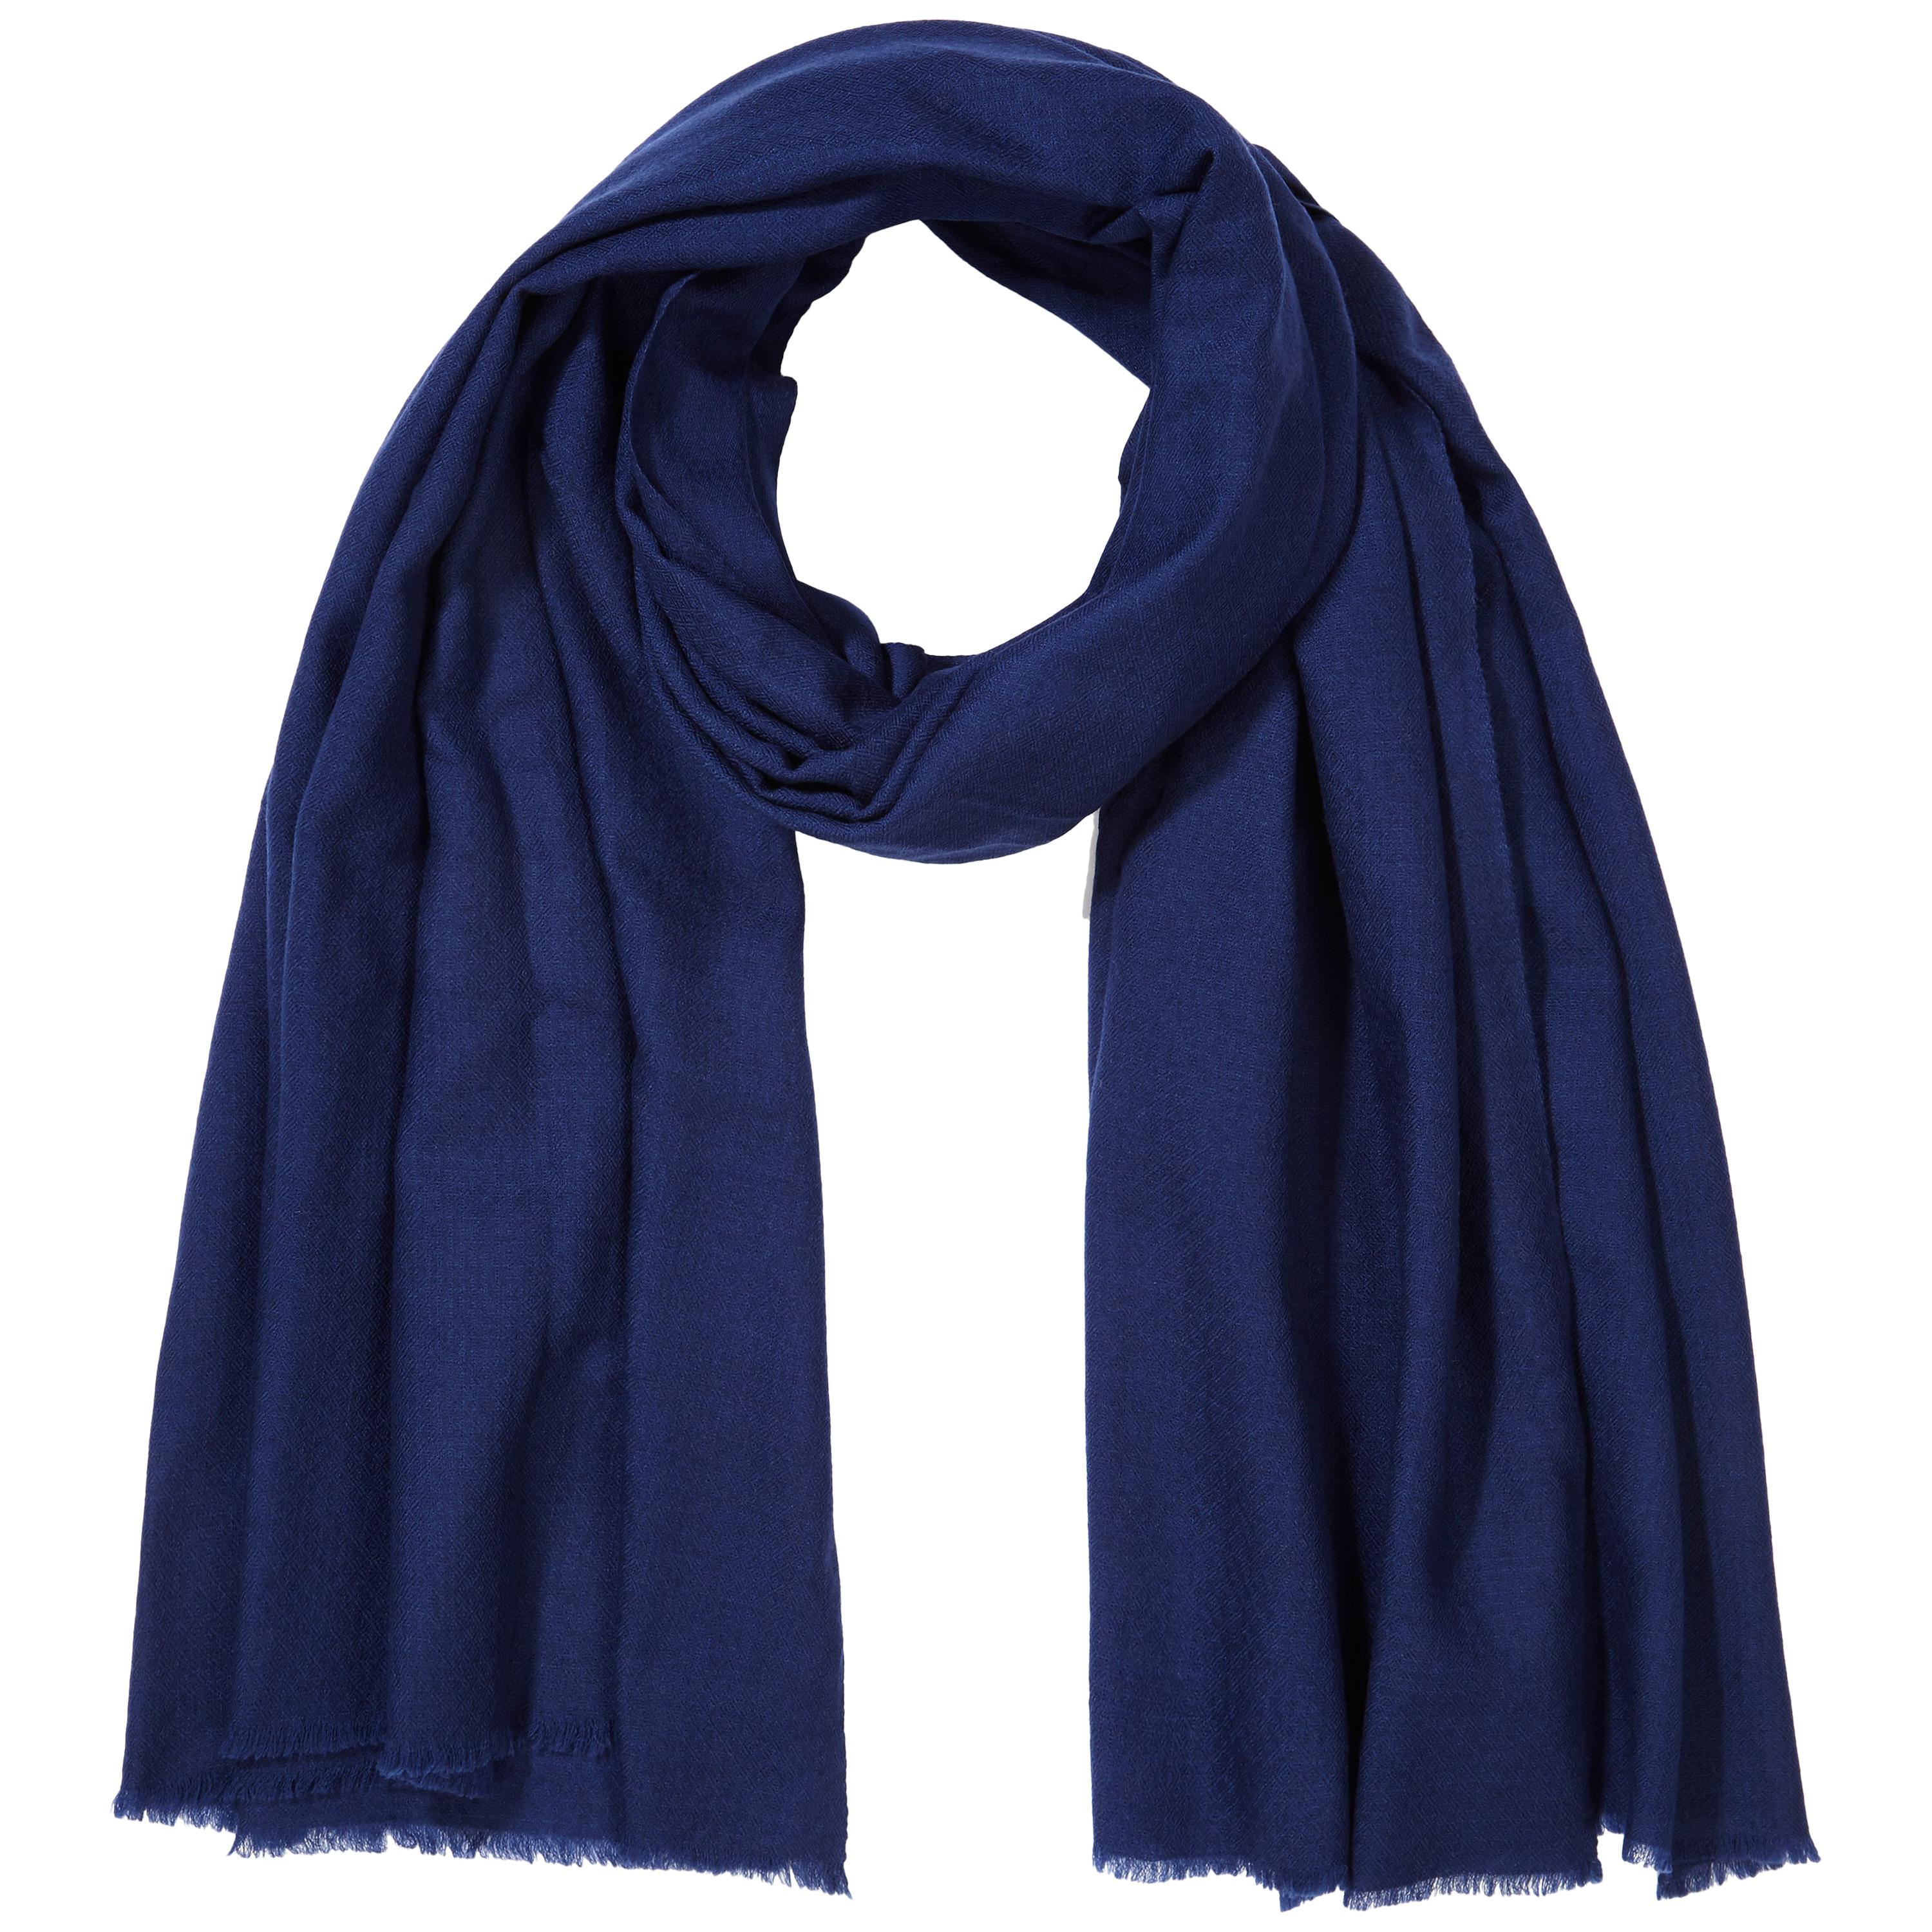 Cashmere Wool Shawl in Ink Navy   